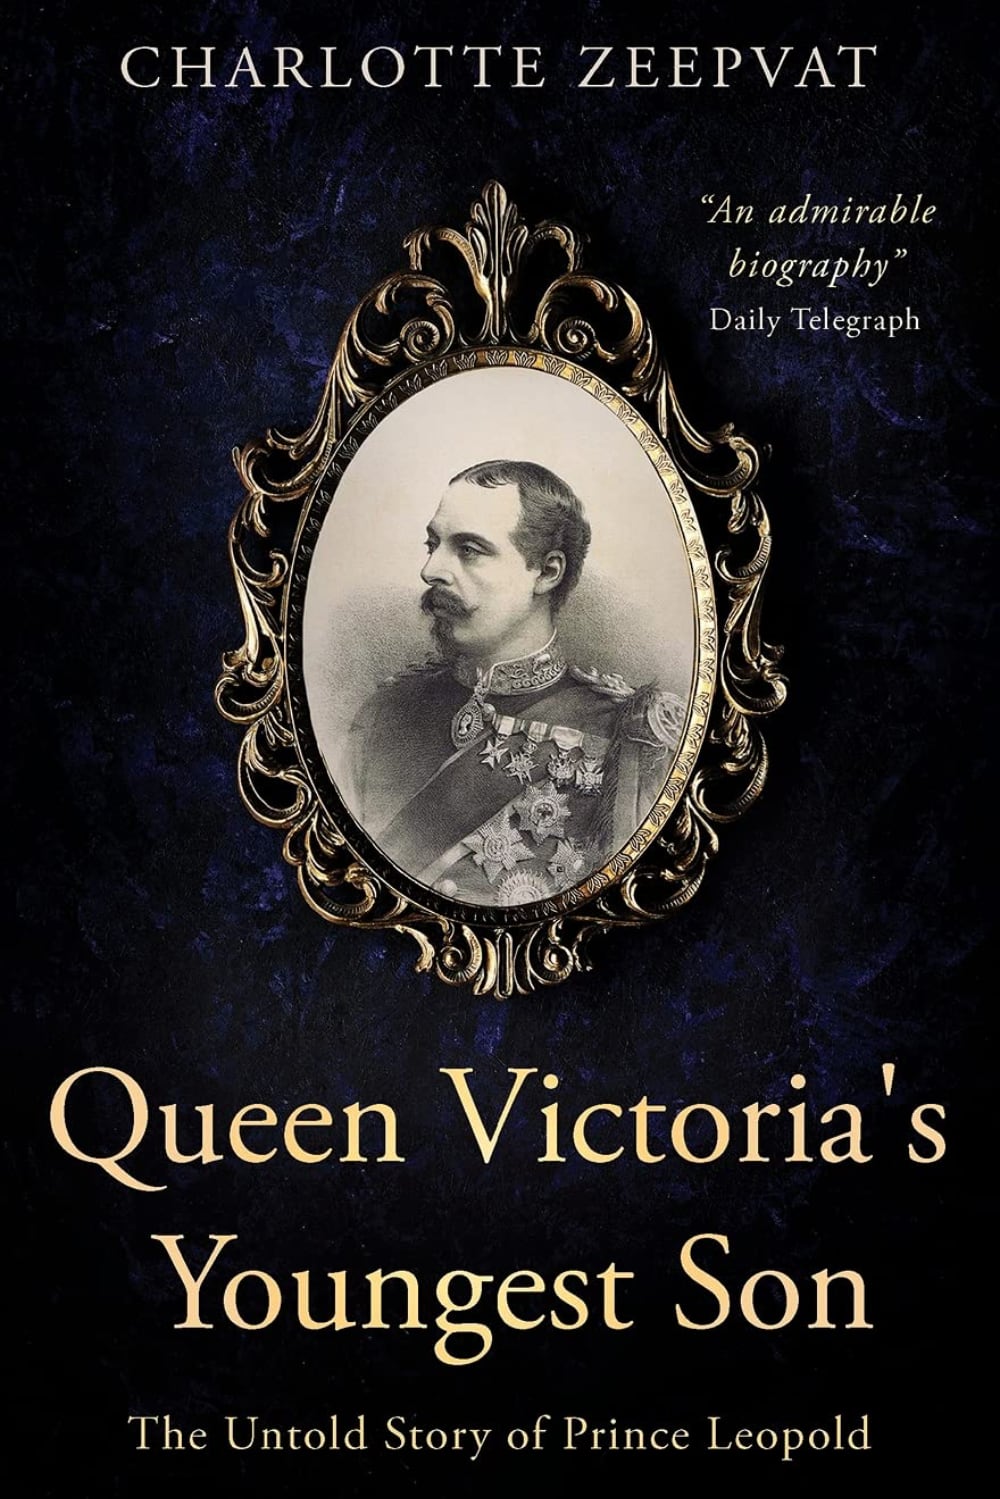 Queen Victoria’s Youngest Son by Charlotte Zeepvat